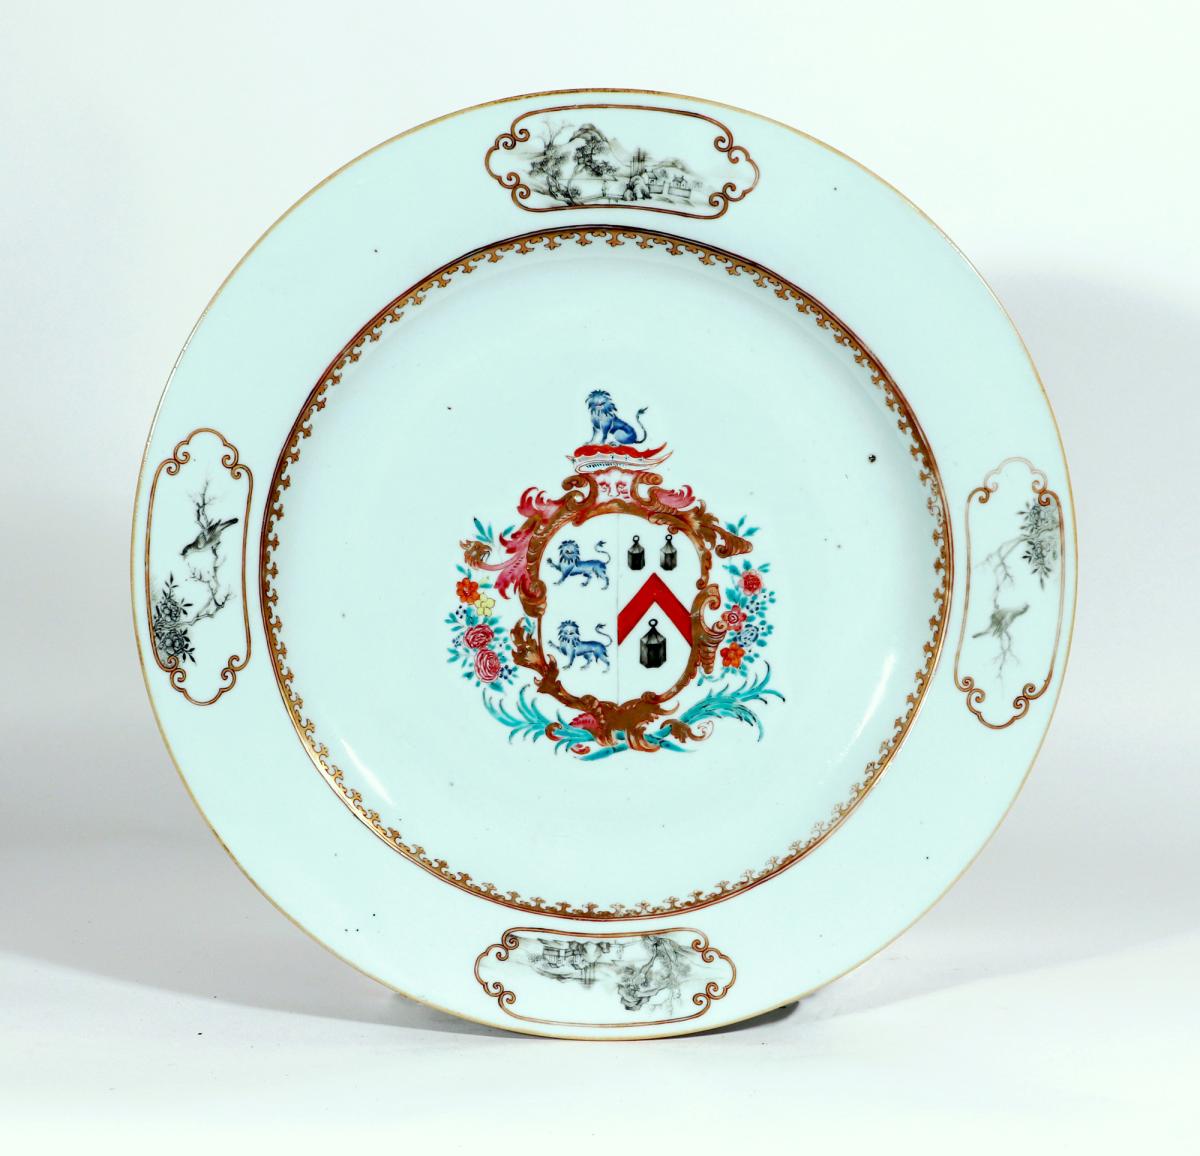 Chinese Export Porcelain Large Armorial Dish, Arms of Hanmer impaling Jennens